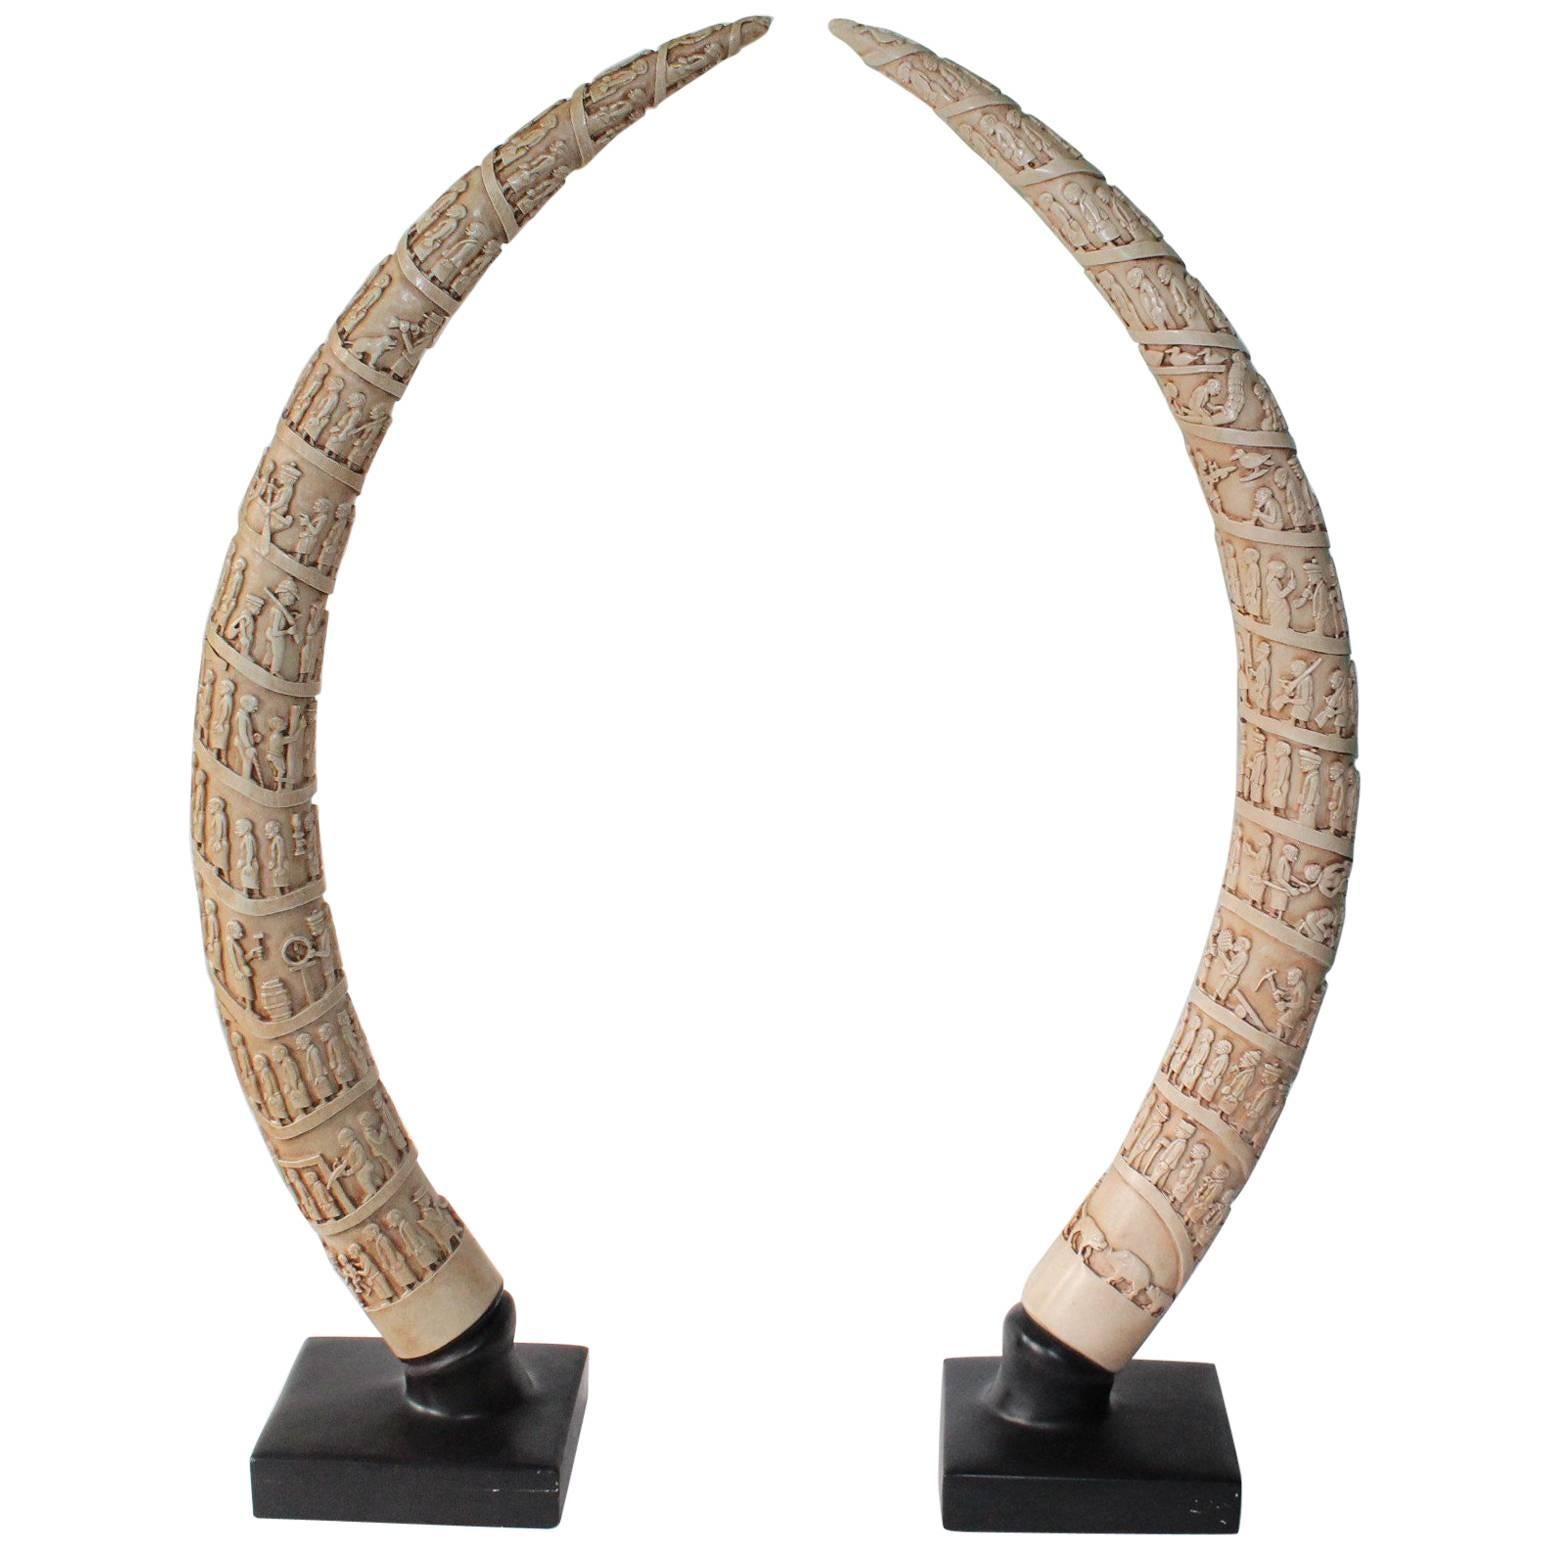 Carved Tusk Shaped Sculptures in Plaster by Austin, 1986